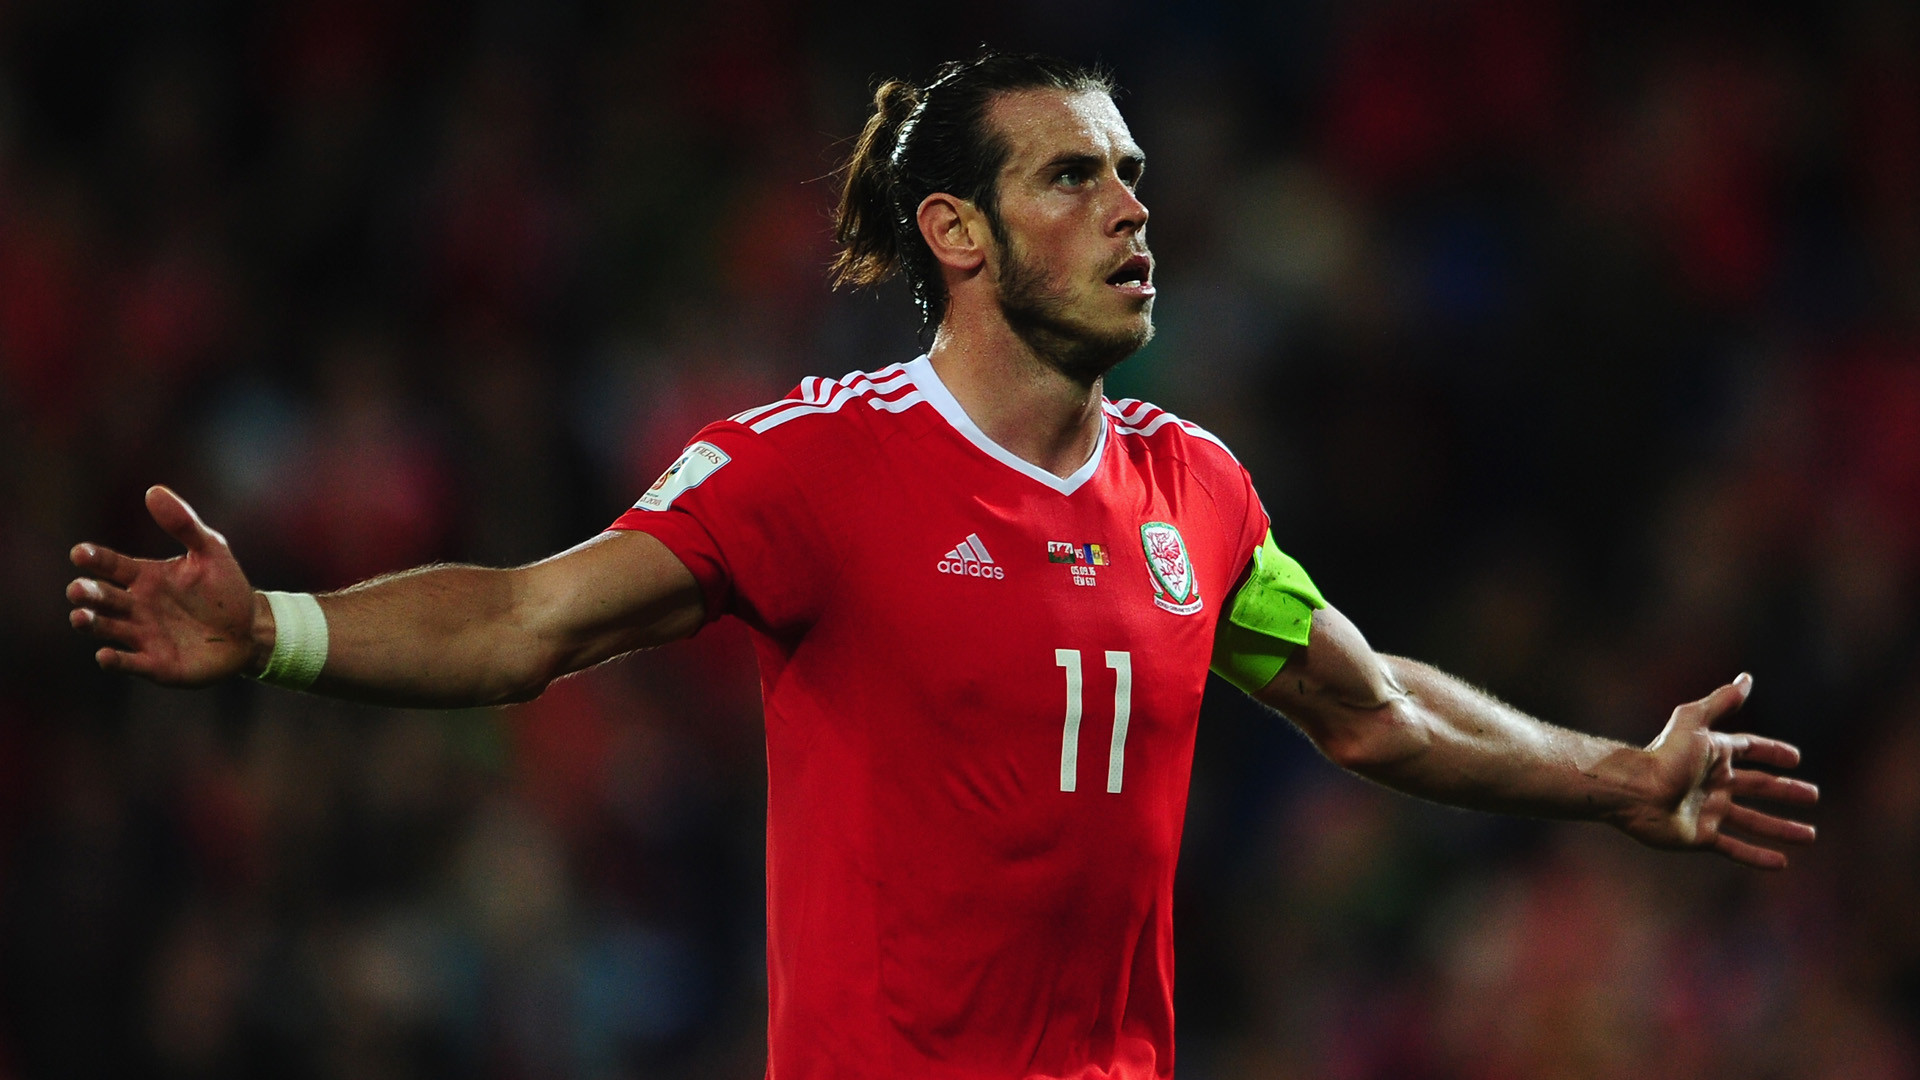 1920x1080 Gareth Bale will not be upset by rough tactics, says Wales captain Ashley  Williams